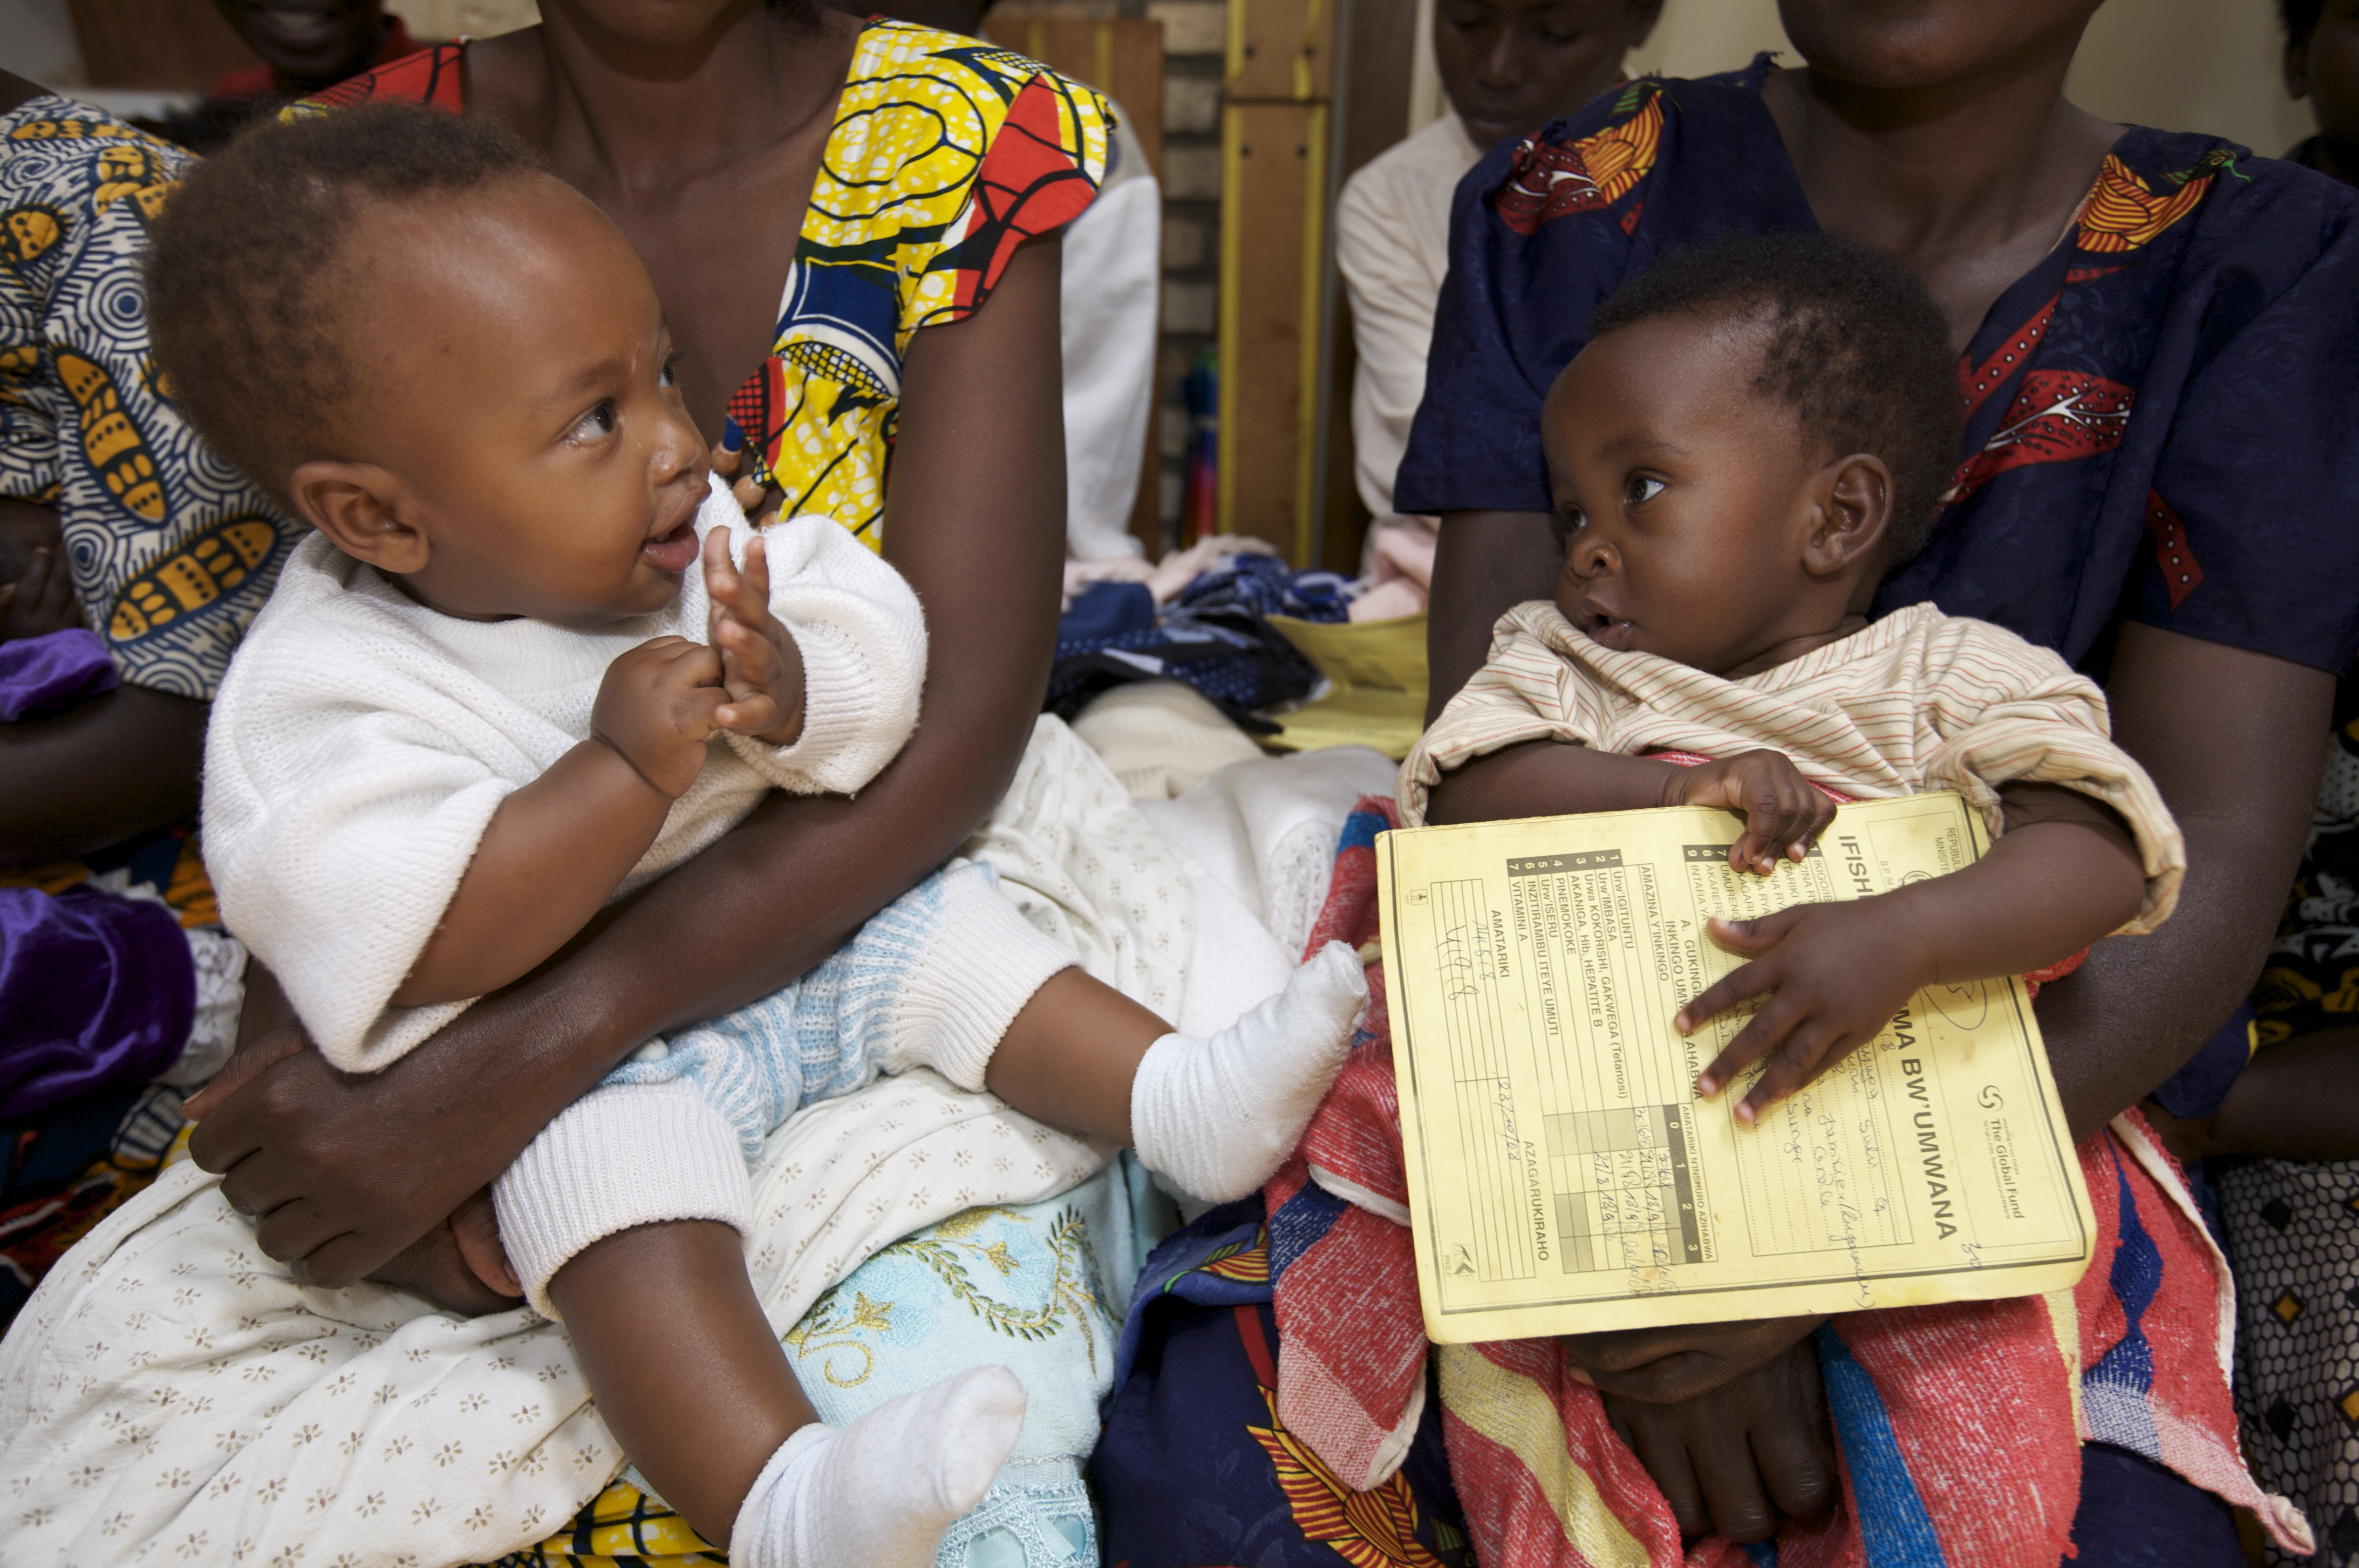 Two young children await their doses of the pneumococcal conjugate vaccine (PCV) in Rwanda.